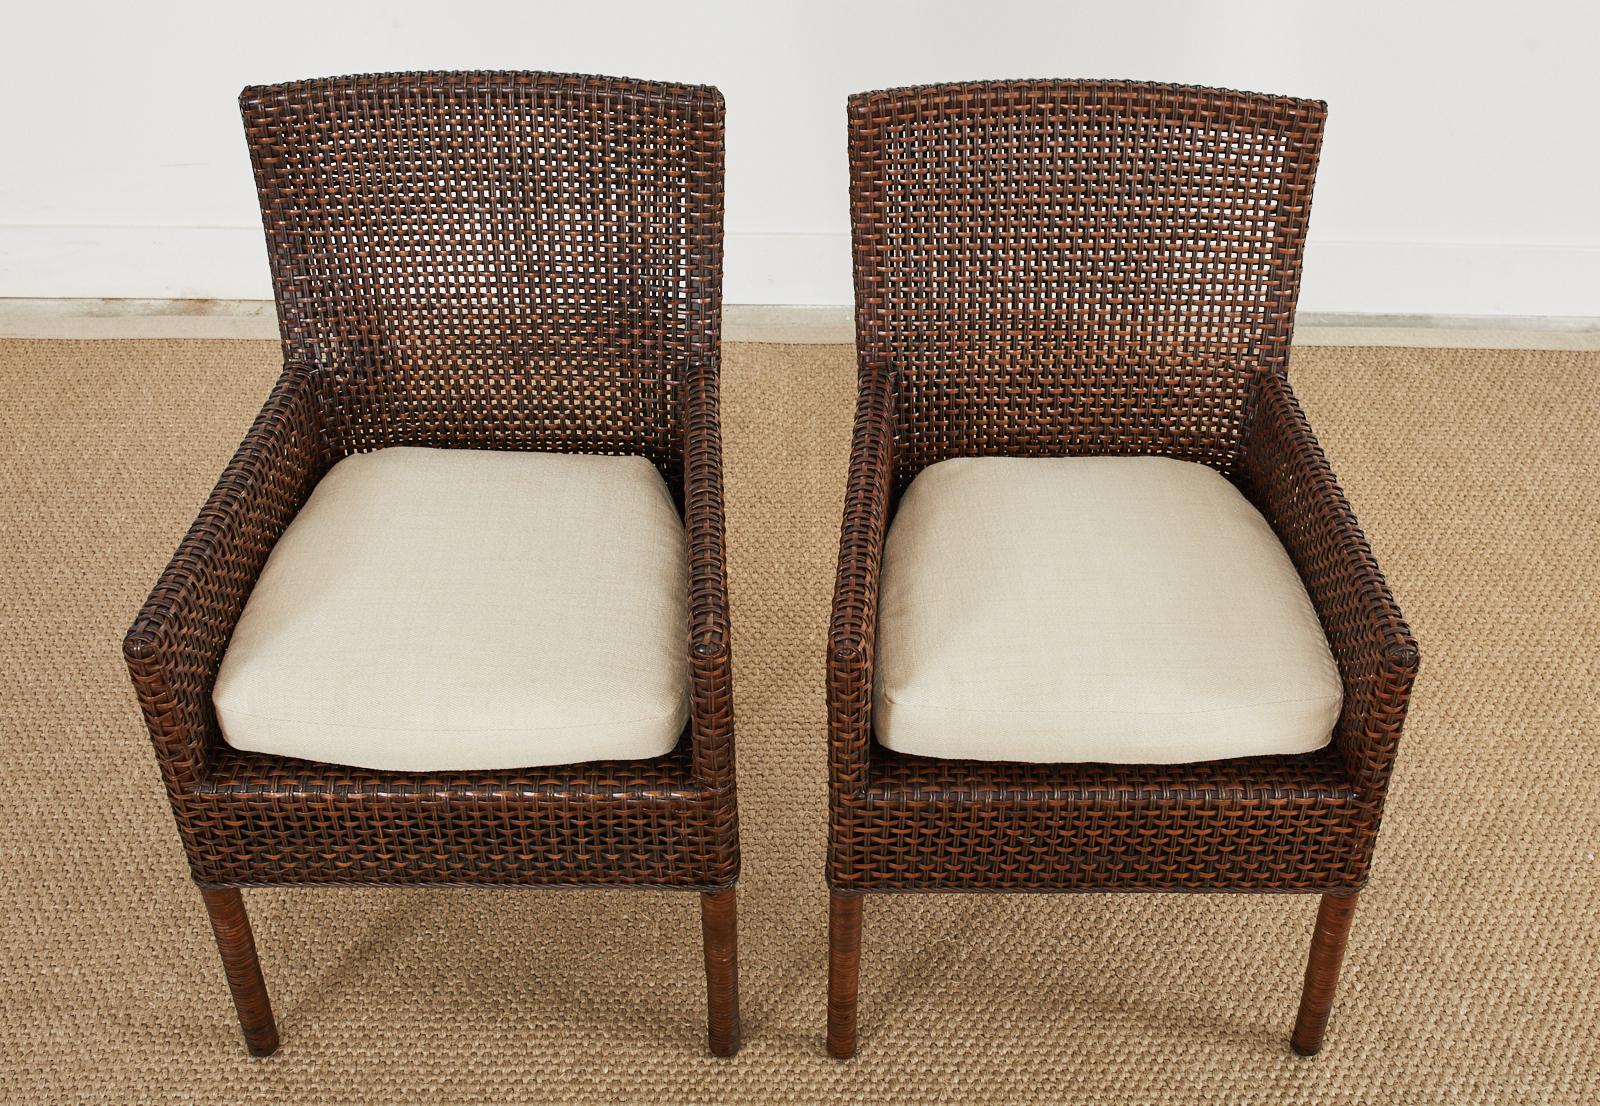 Pair of Organic Modern Woven Wicker Rattan Dining Armchairs In Good Condition For Sale In Rio Vista, CA